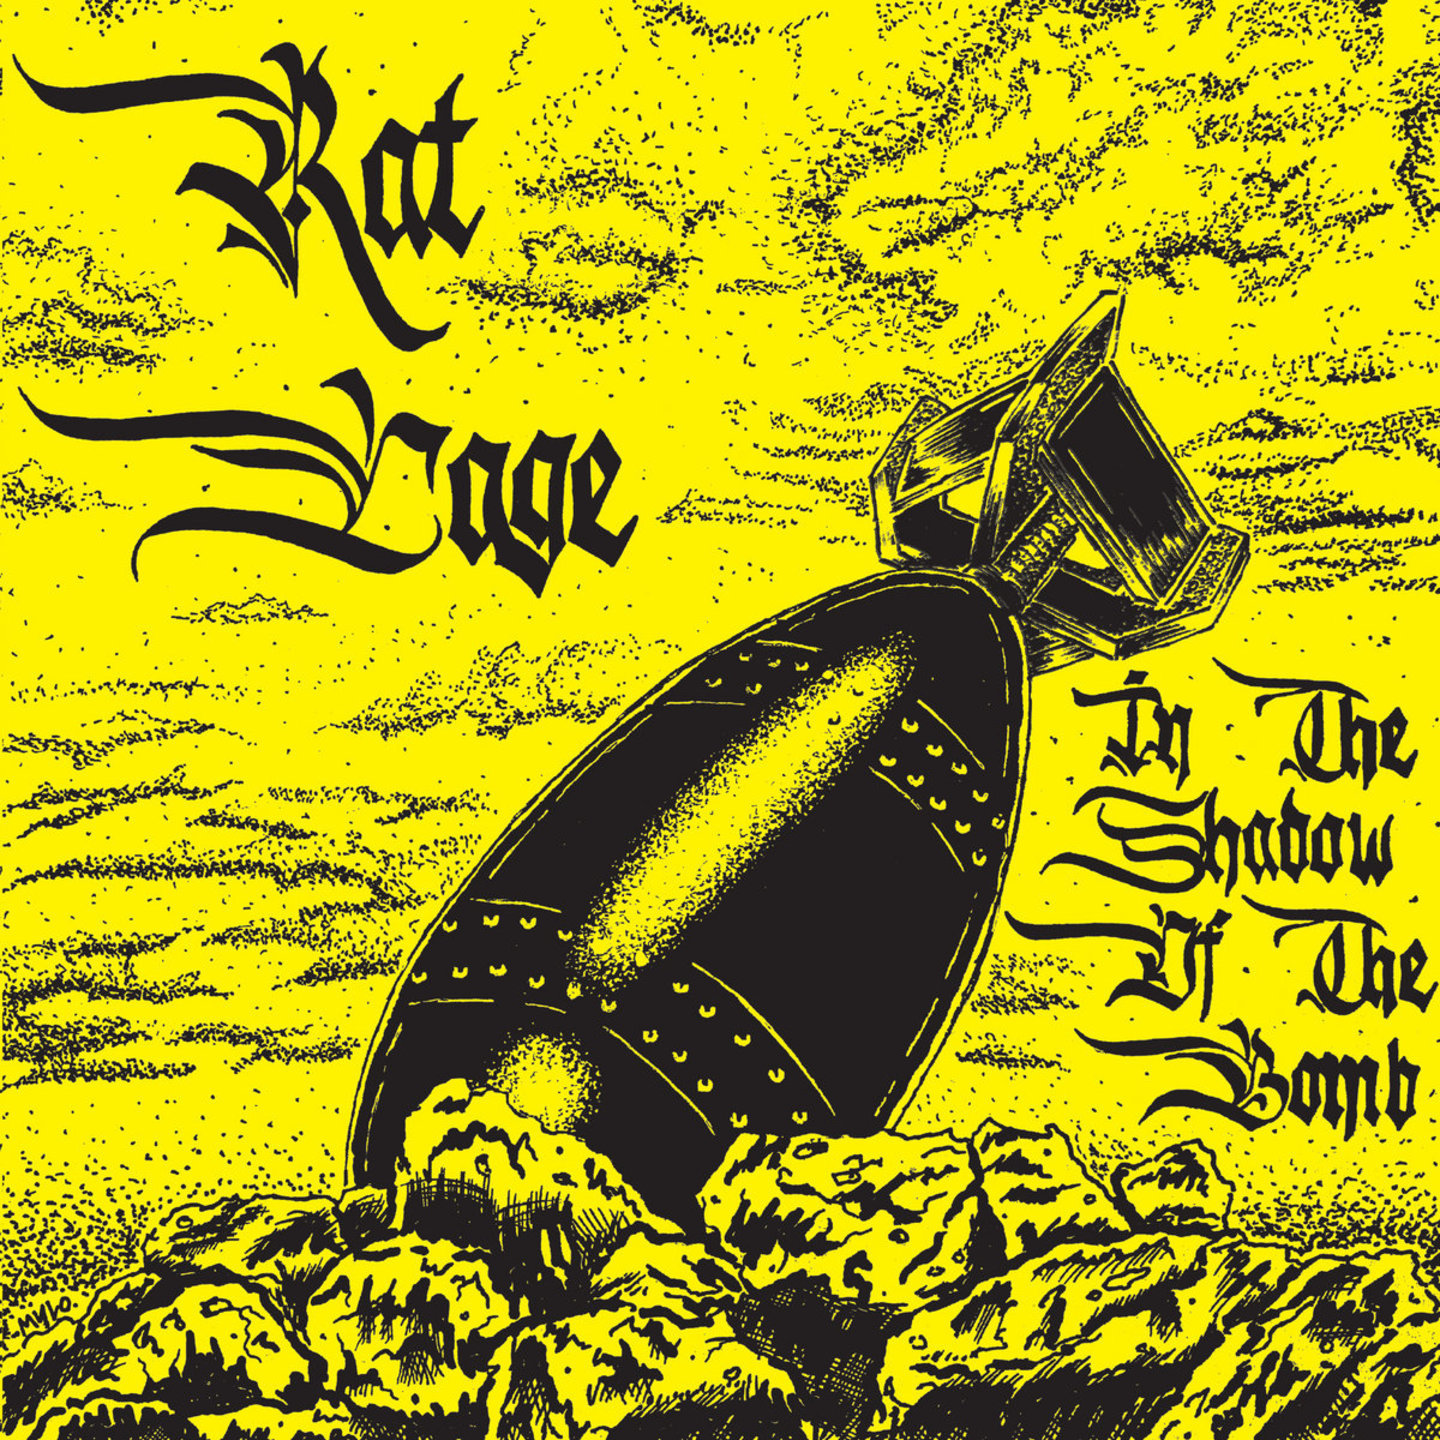 RAT CAGE - In The Shadow Of The Bomb 7